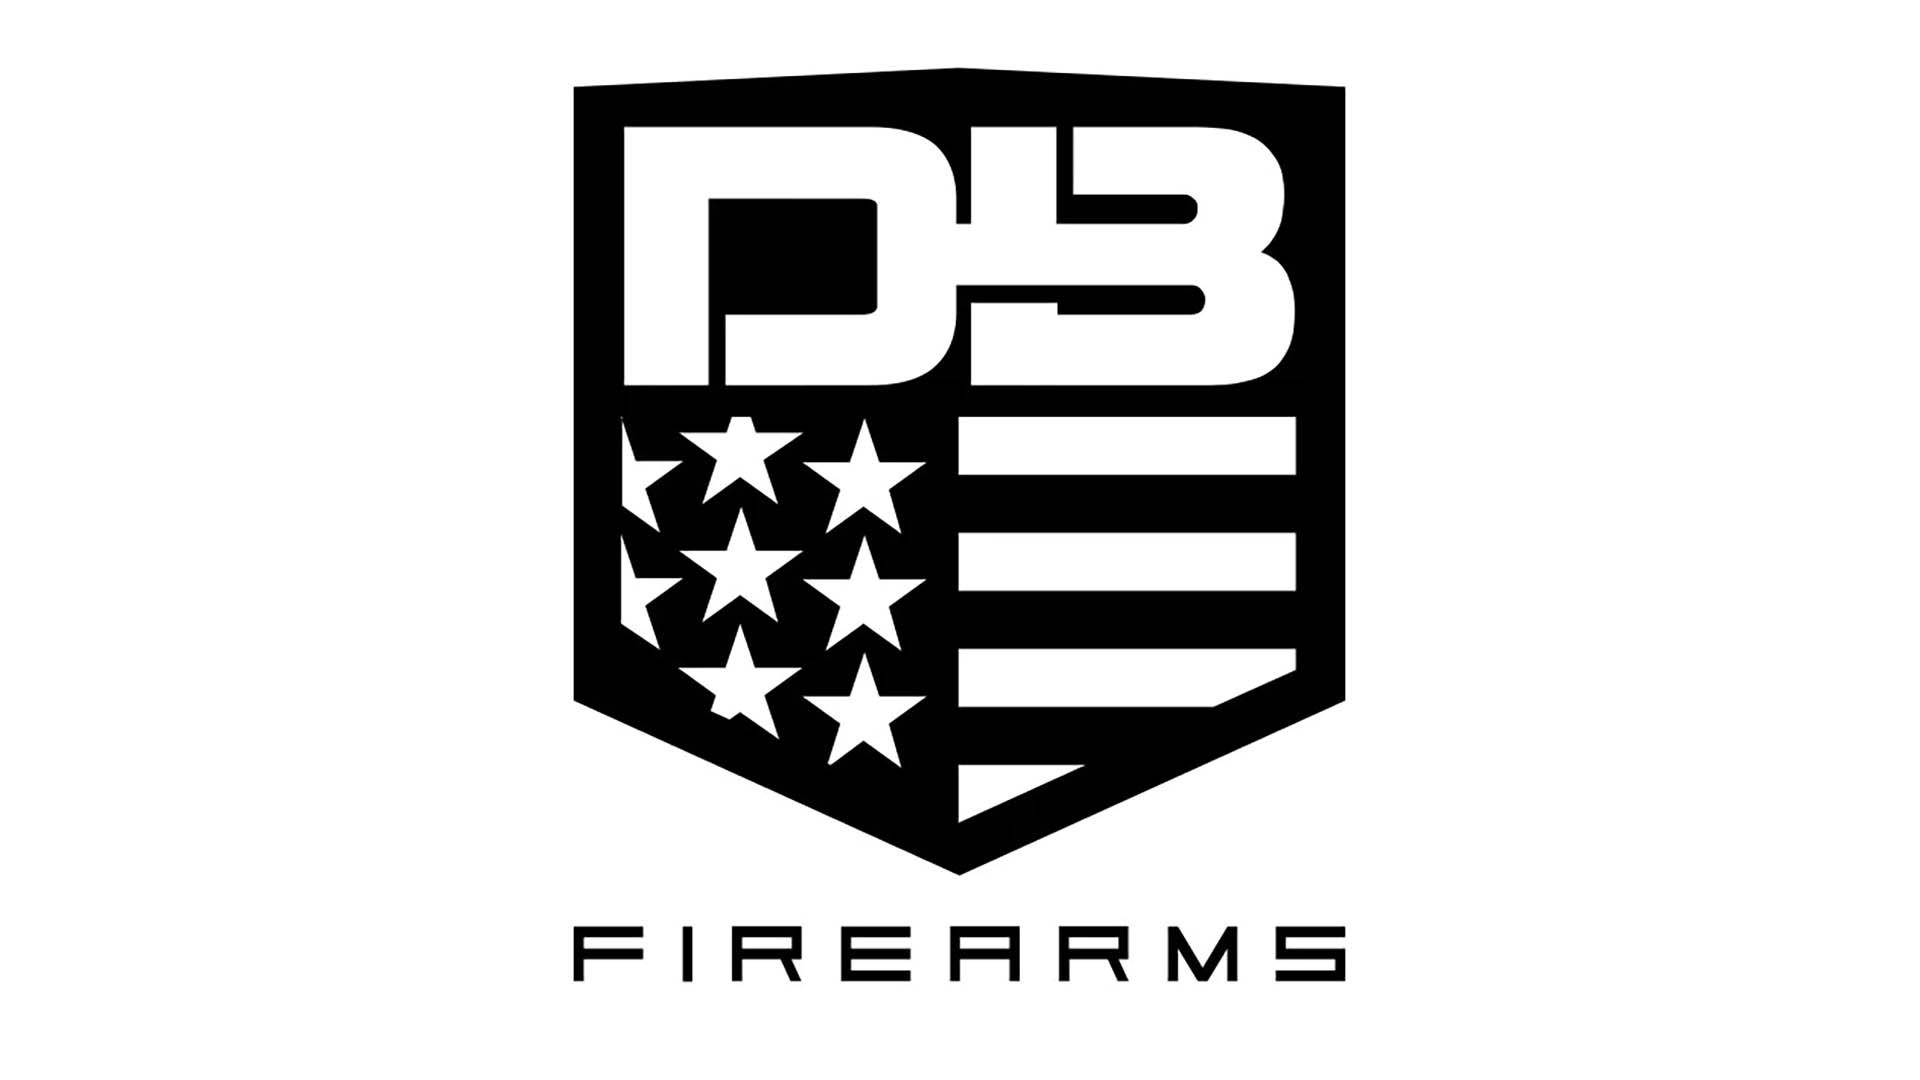 Diamondback Firearms: From Airboats To Guns